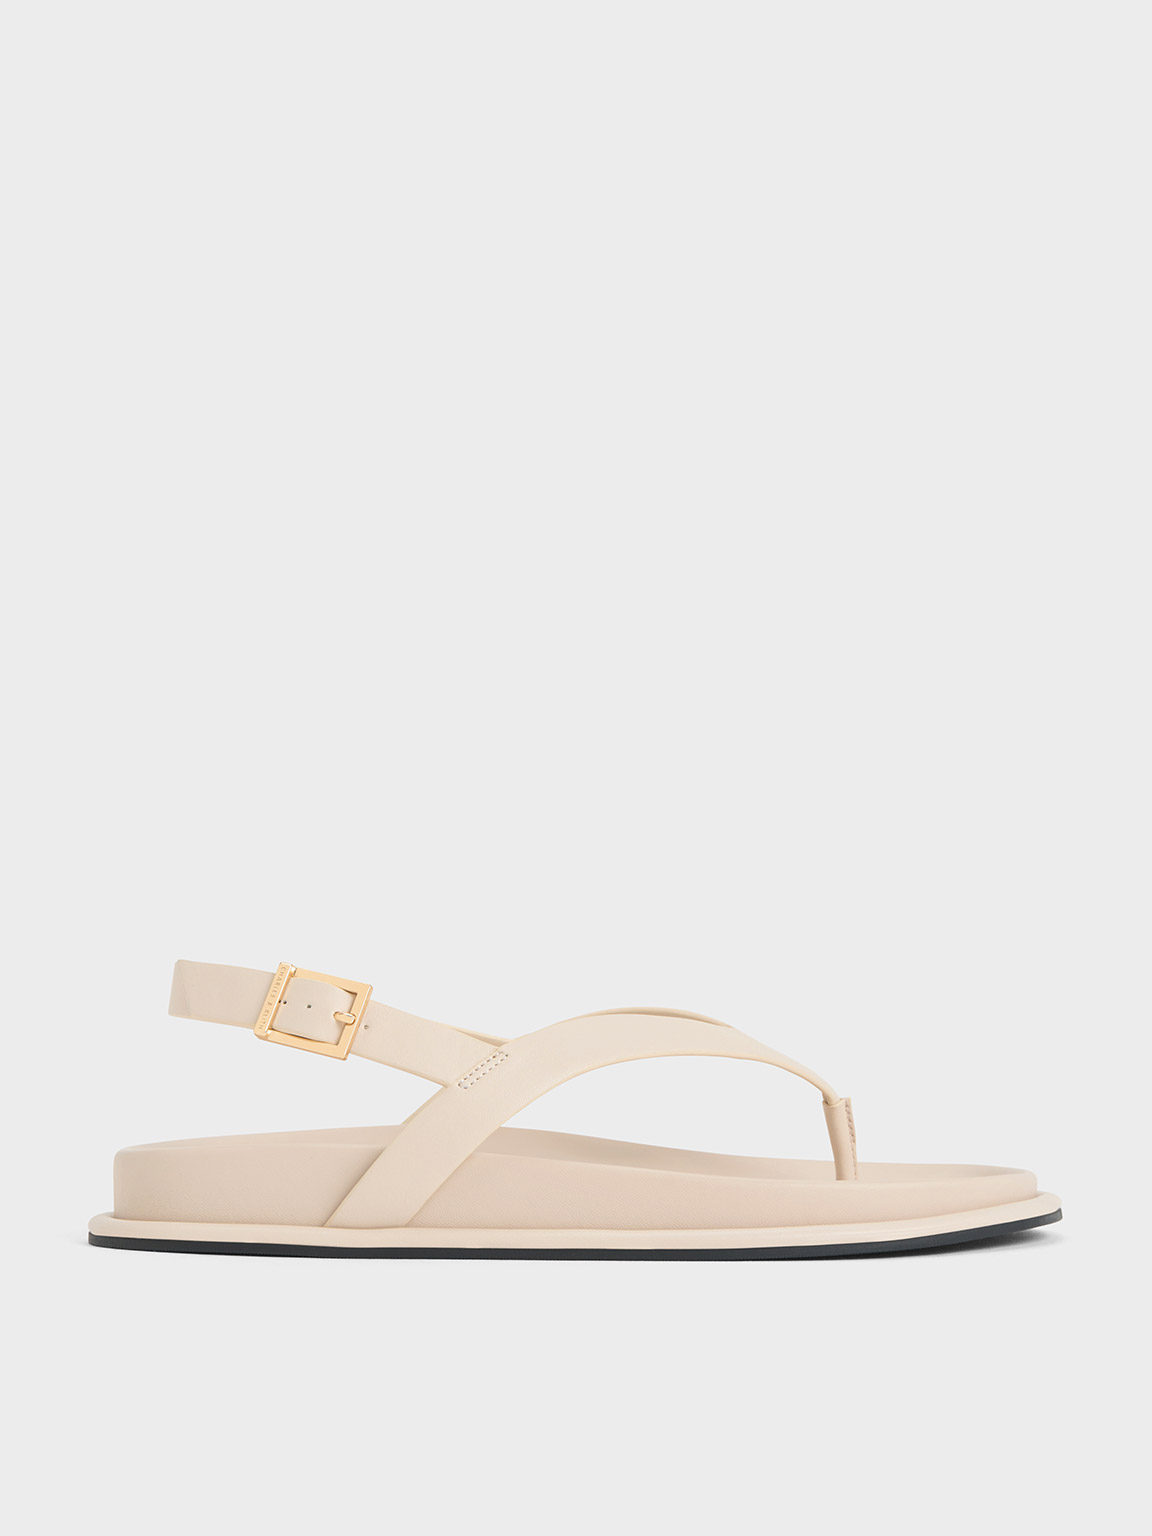 Report Shields Flat Thong Sandals in White | Lyst